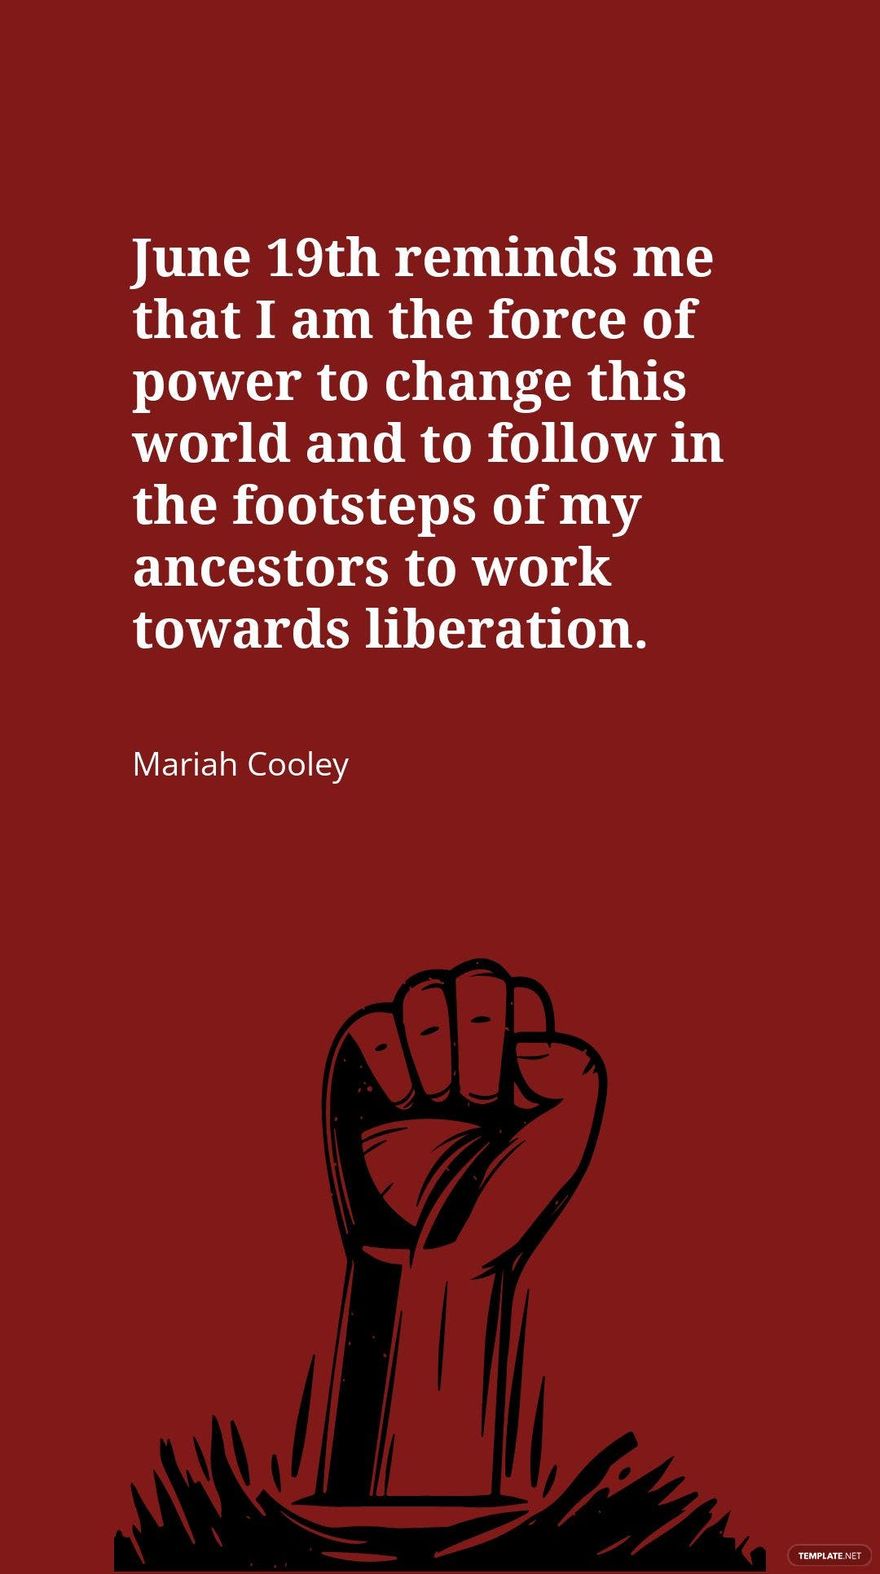 Free Mariah Cooley - June 19th reminds me that I am the force of power to change this world and to follow in the footsteps of my ancestors to work towards liberation. in JPG